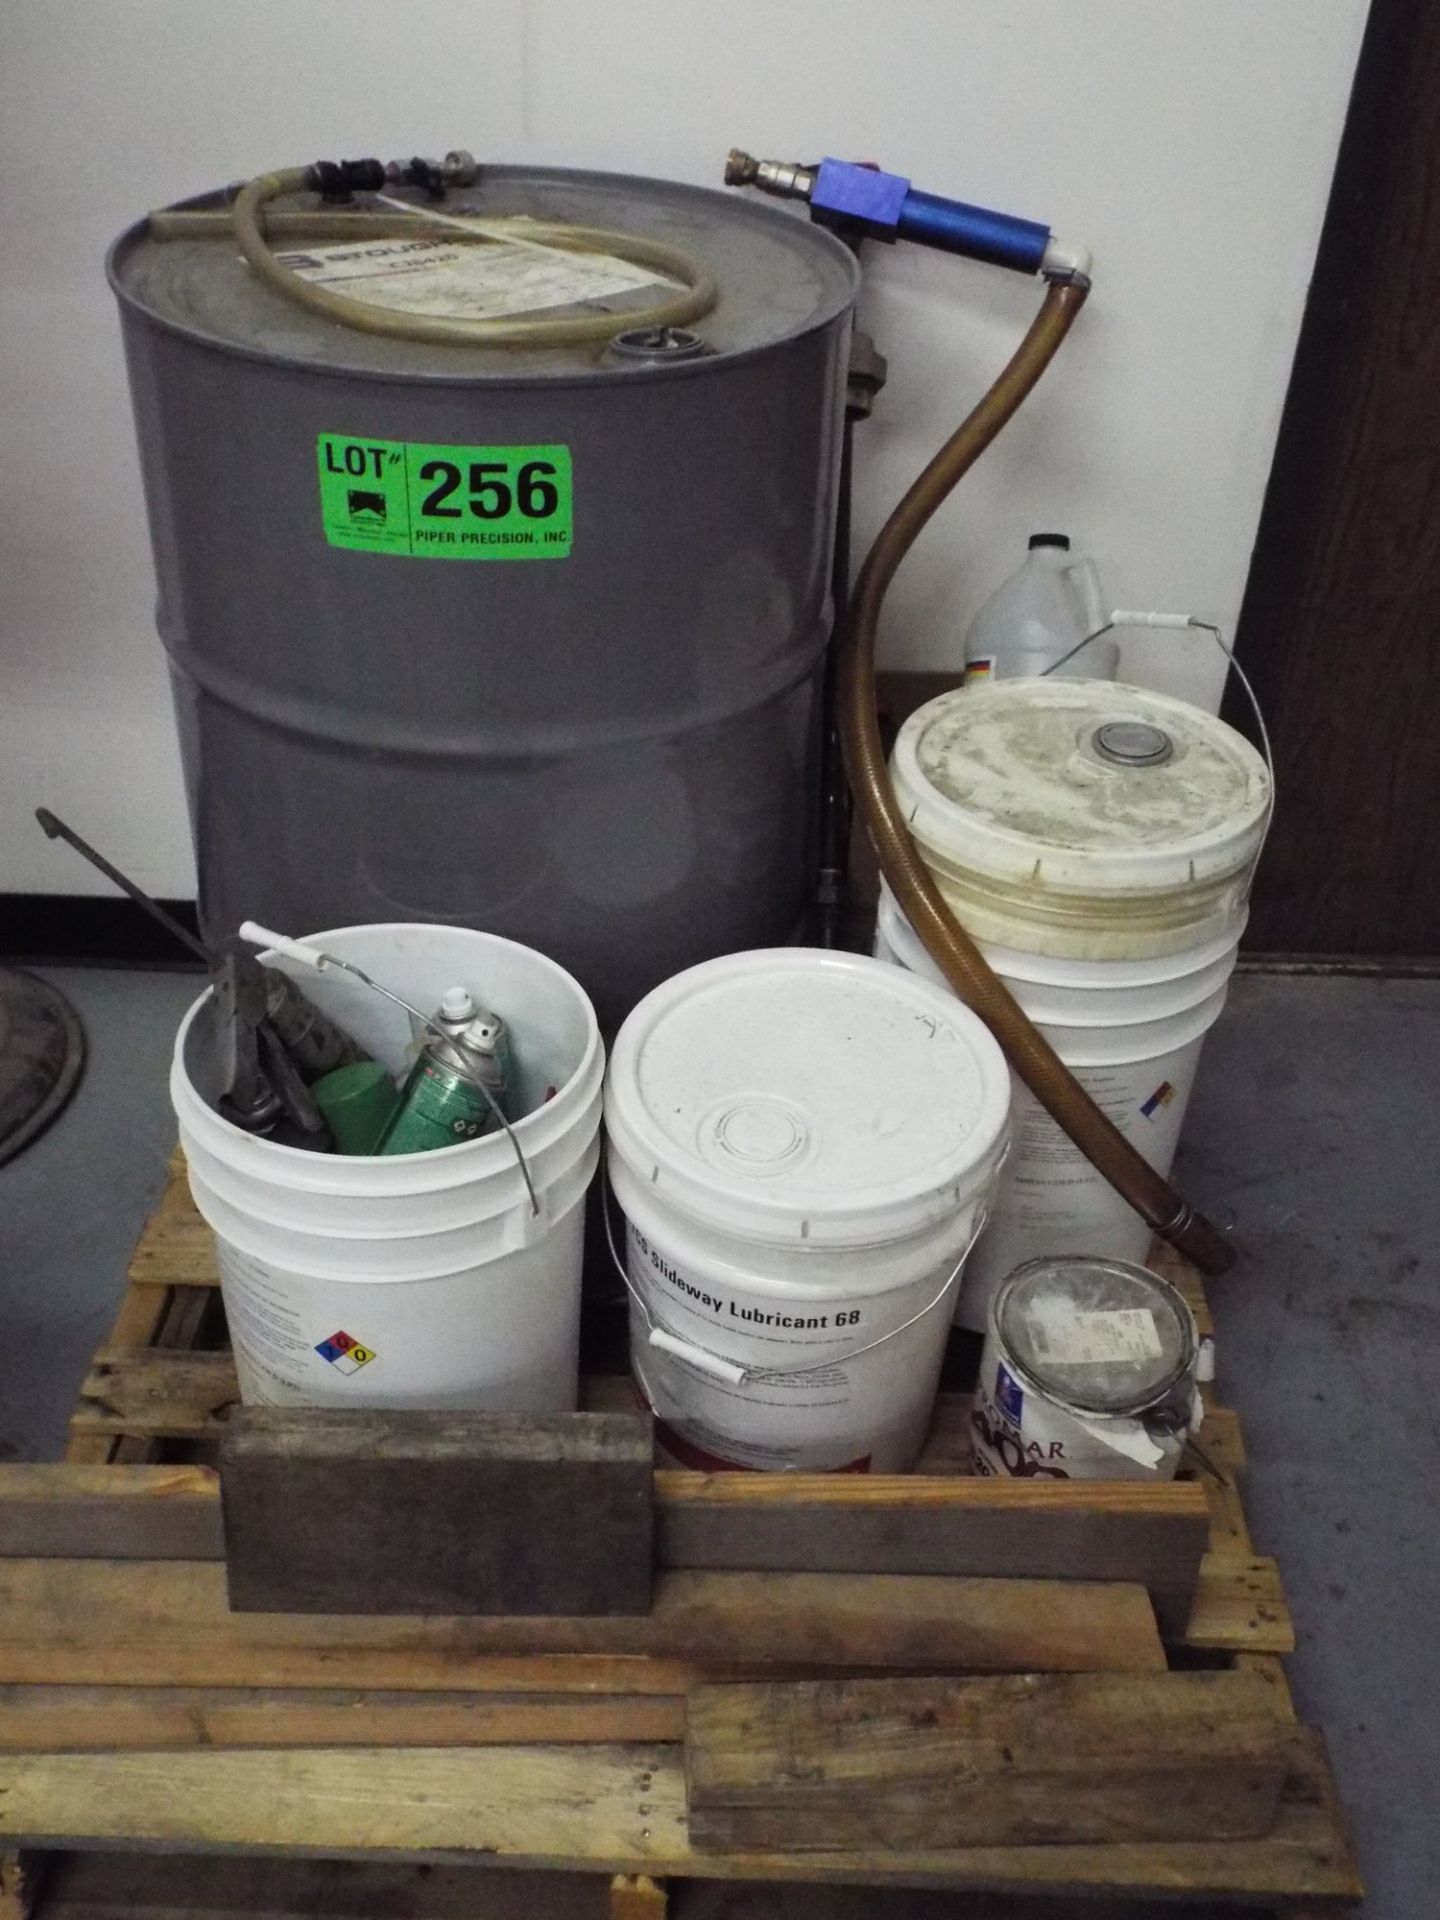 LOT/ OILS, LUBRICANTS AND CHEMICALS